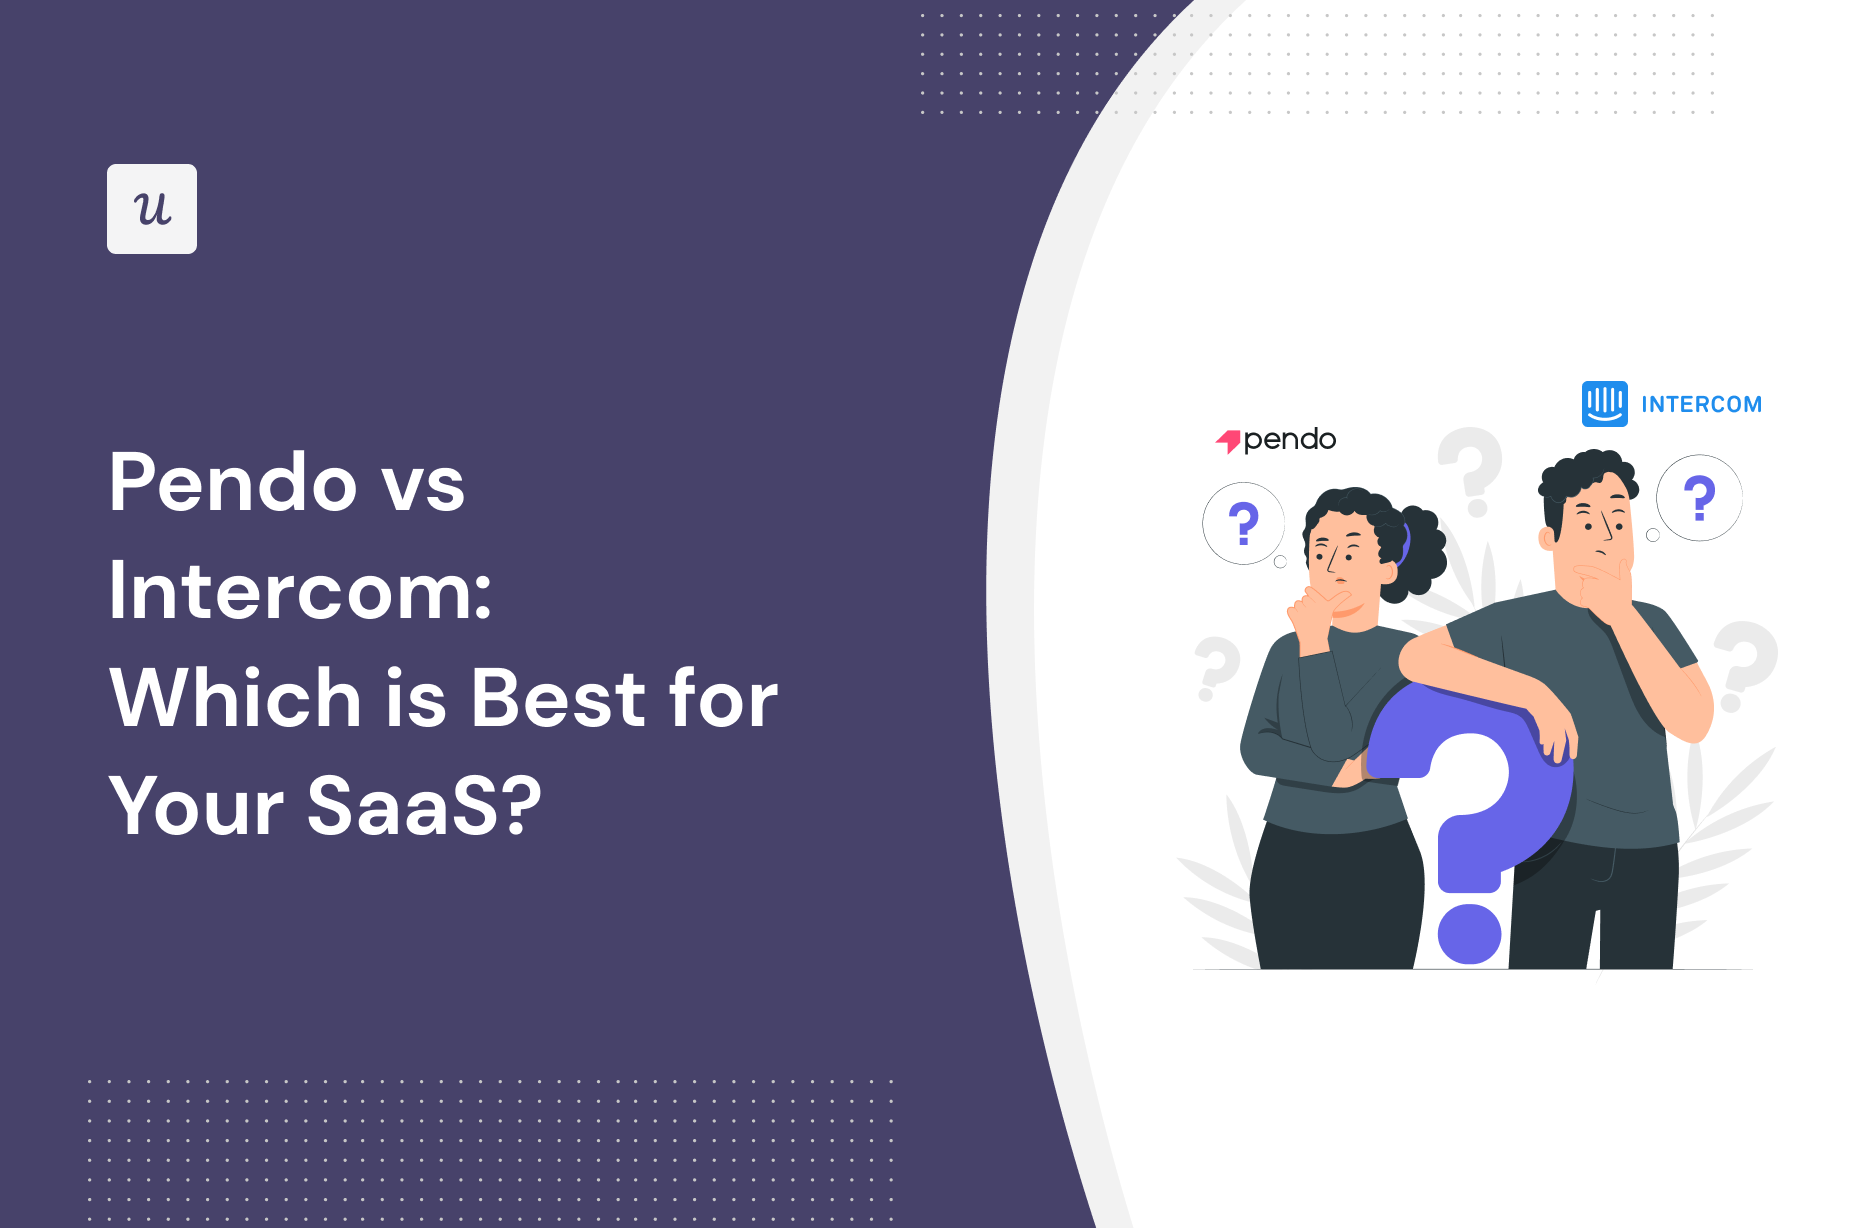 Pendo vs Intercom: Which is Best for Your SaaS?